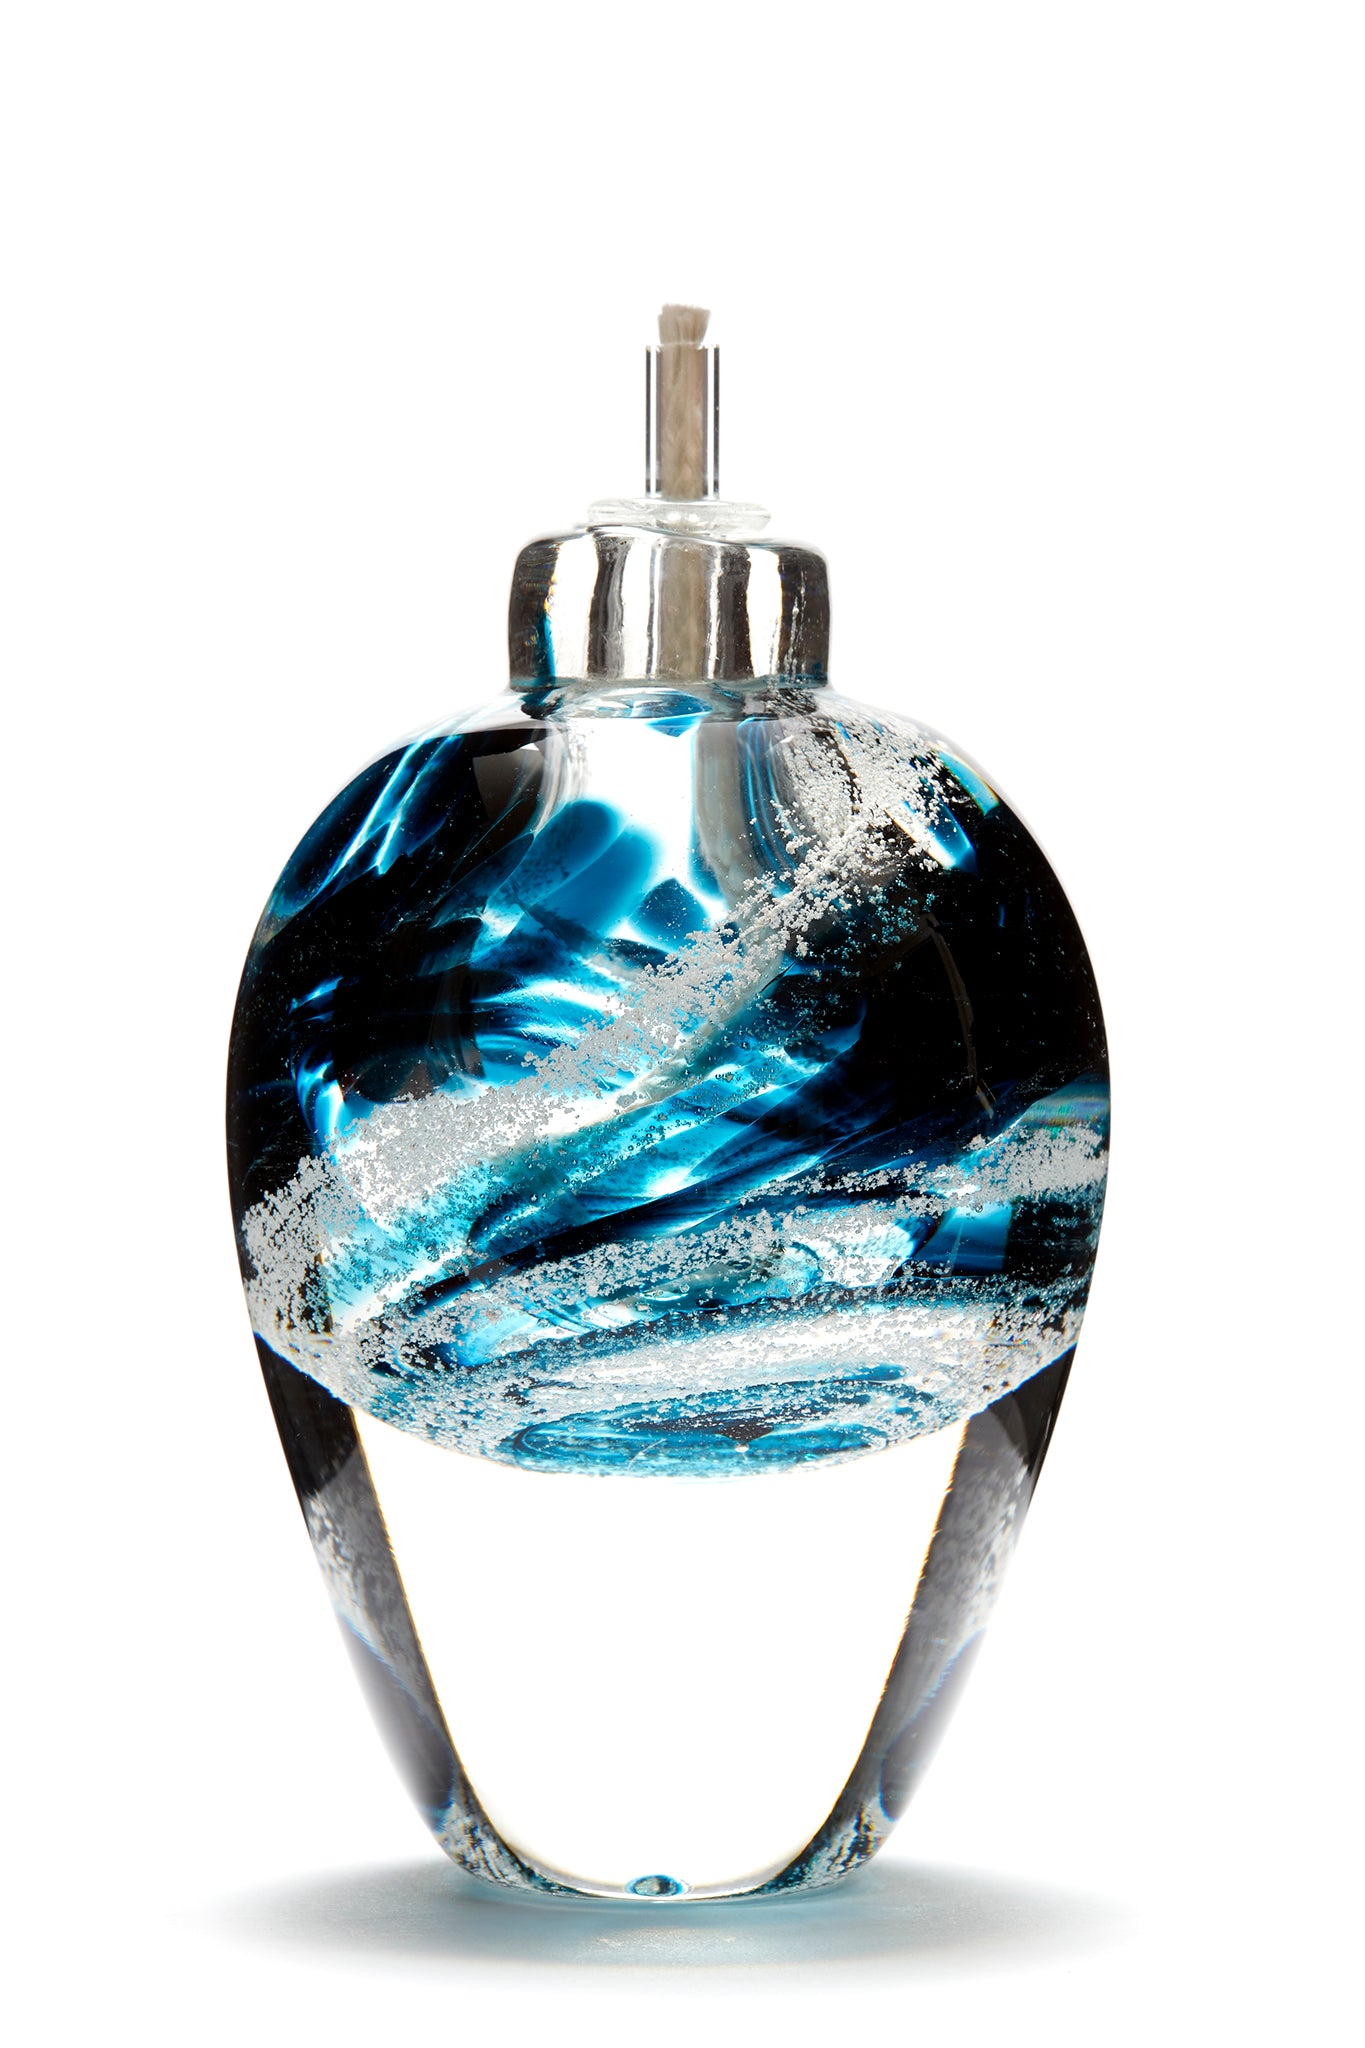 Memorial glass art tall eternal flame oil lamp with cremation ash. Teal blue glass. Colour combination is called "Ocean Wave."